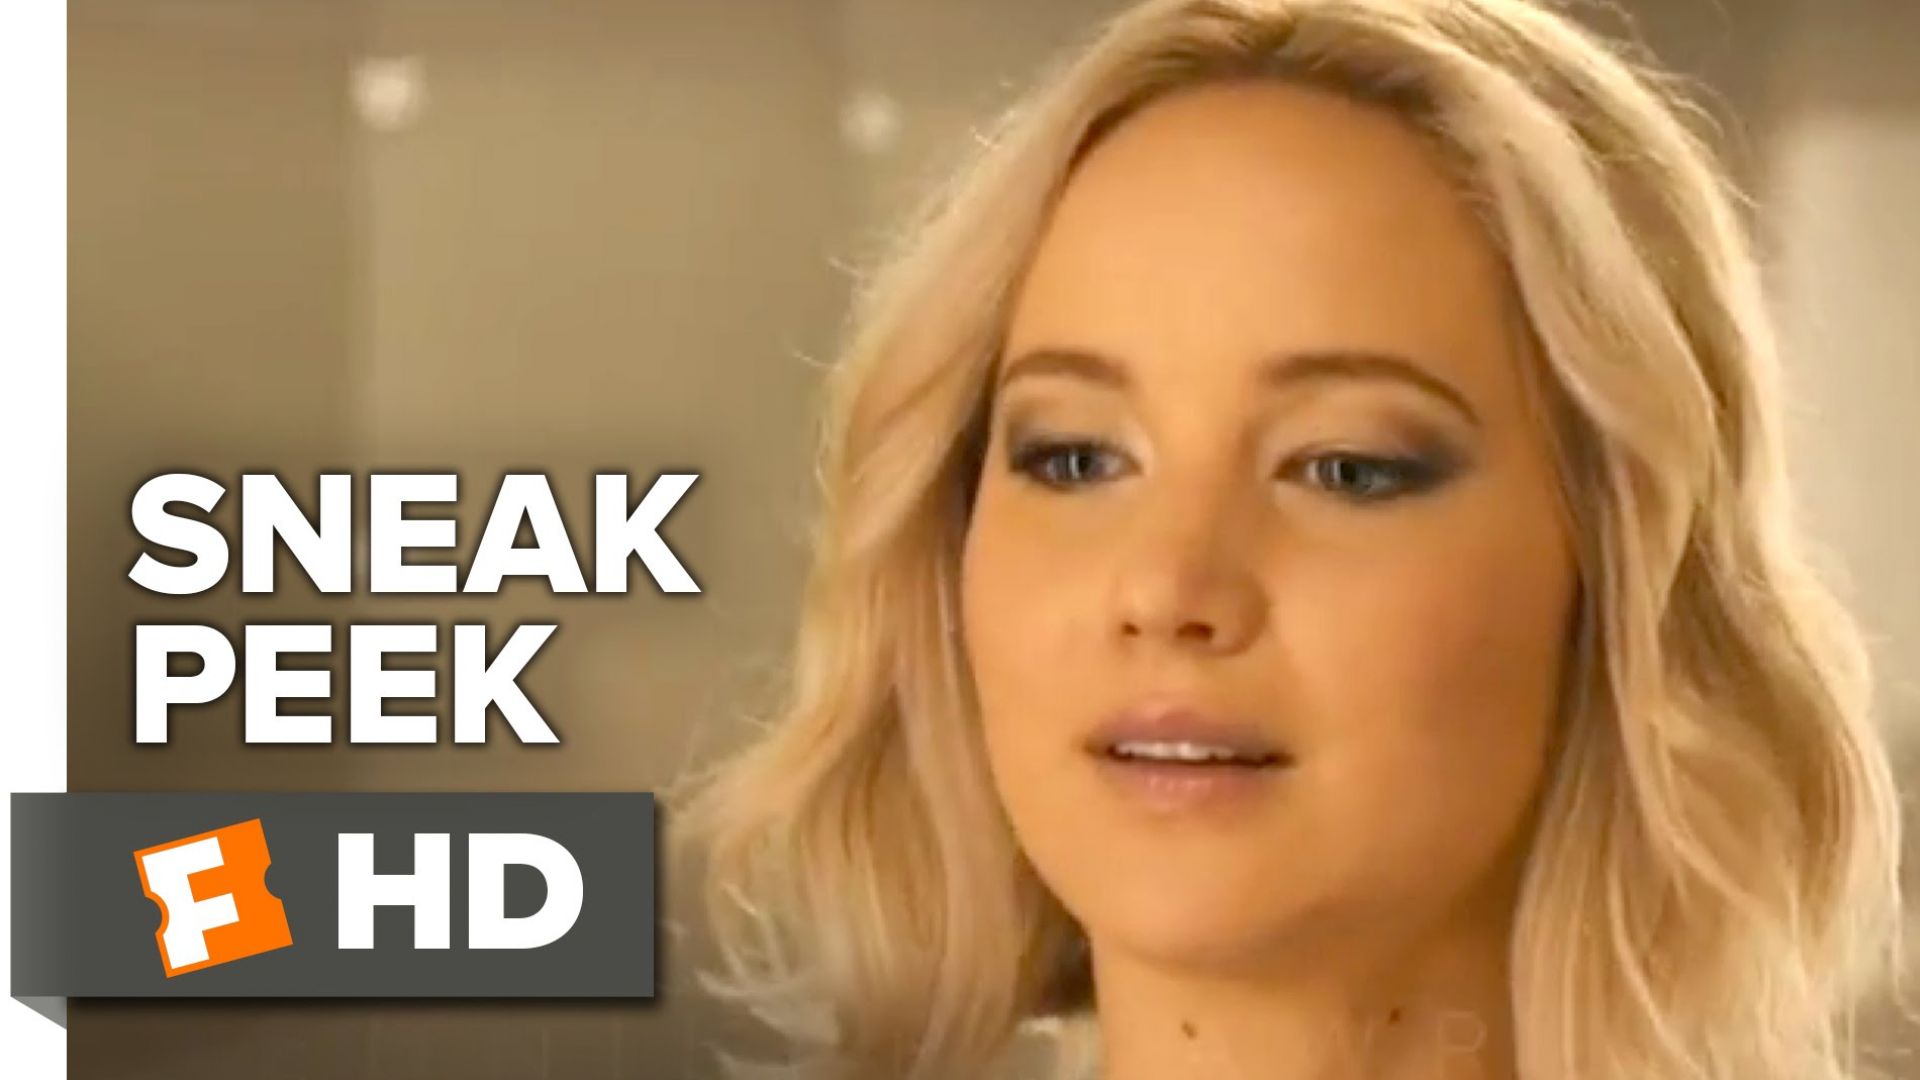 Our first sneak peak at Chris Pratt and Jennifer Lawrence in